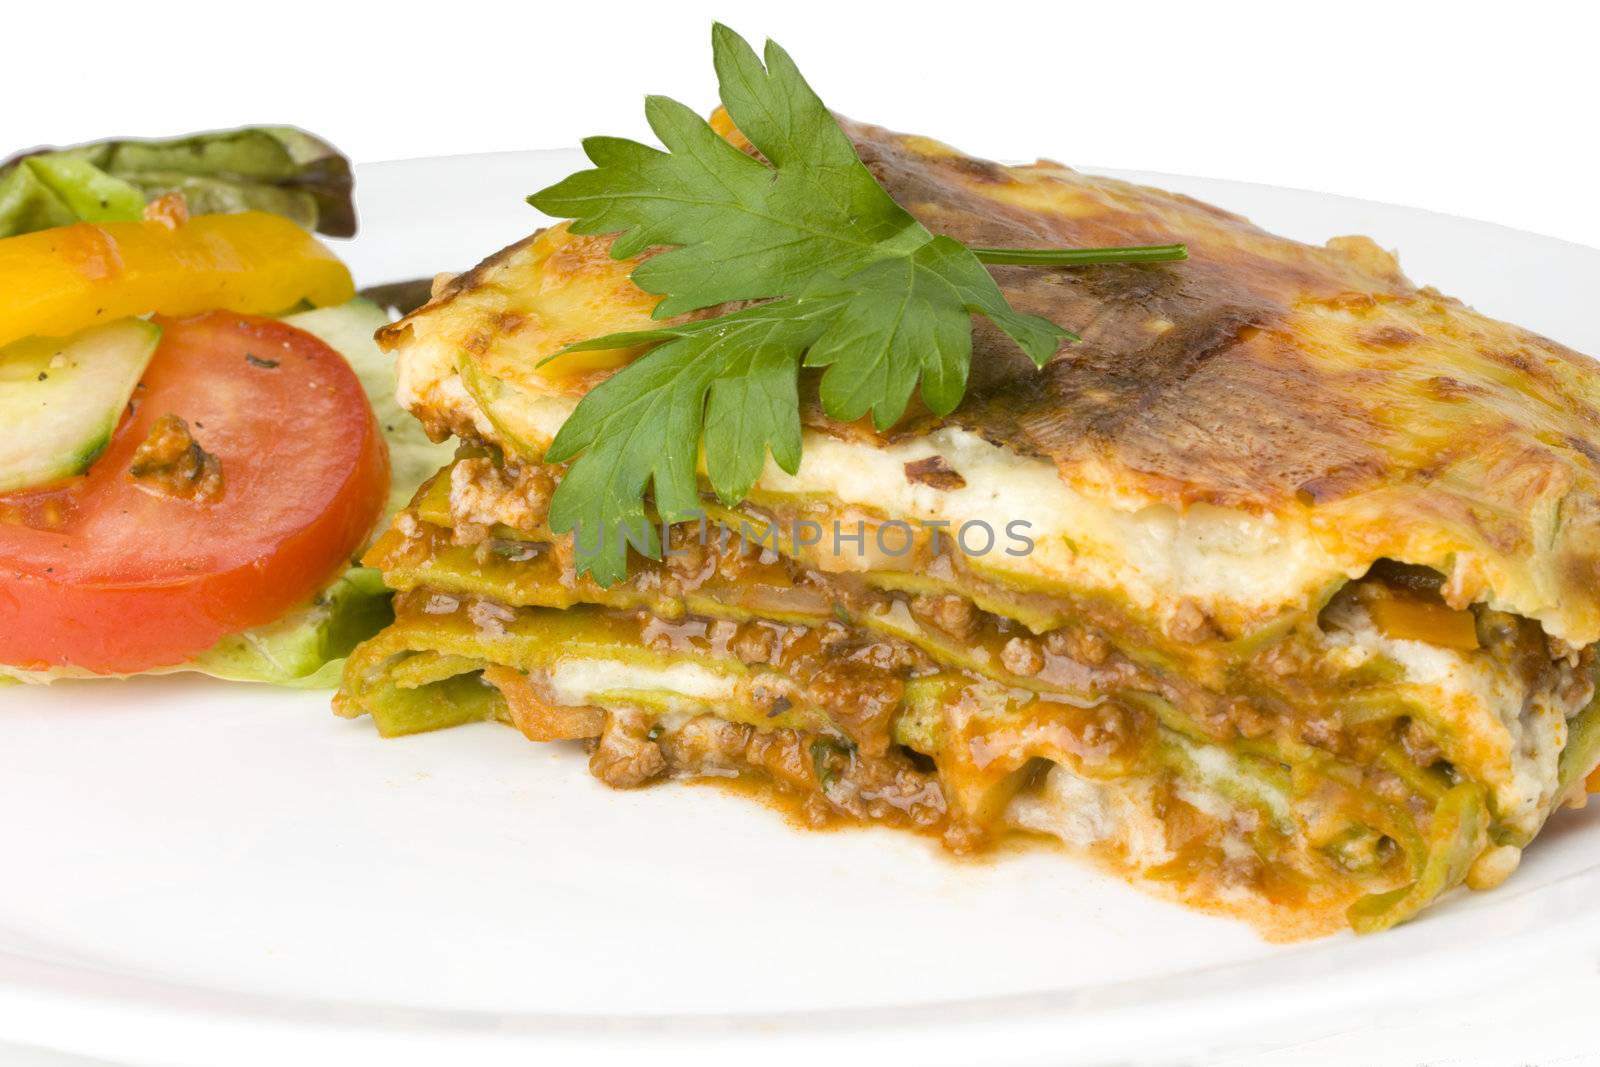 homemade lasagna on a plate by bernjuer